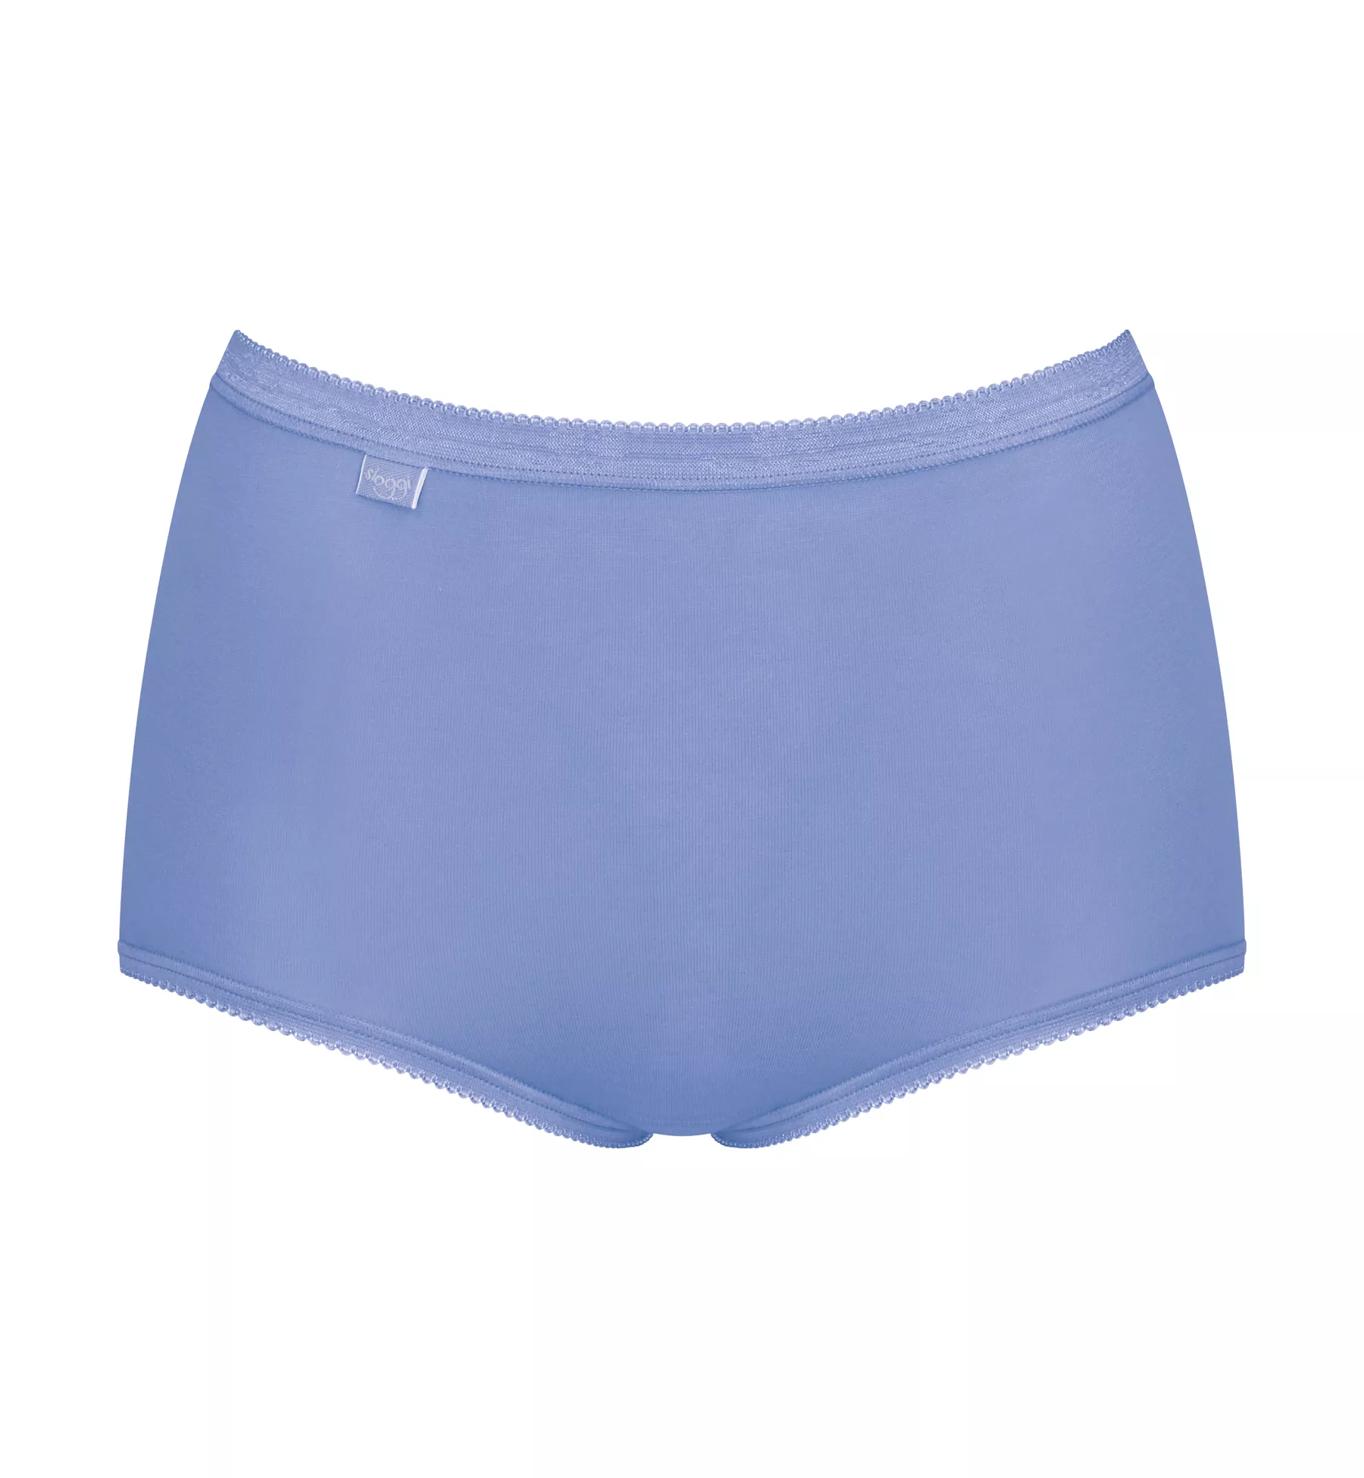 JOHN LEWIS ANYDAY No VPL Short Knickers, Pack of 3